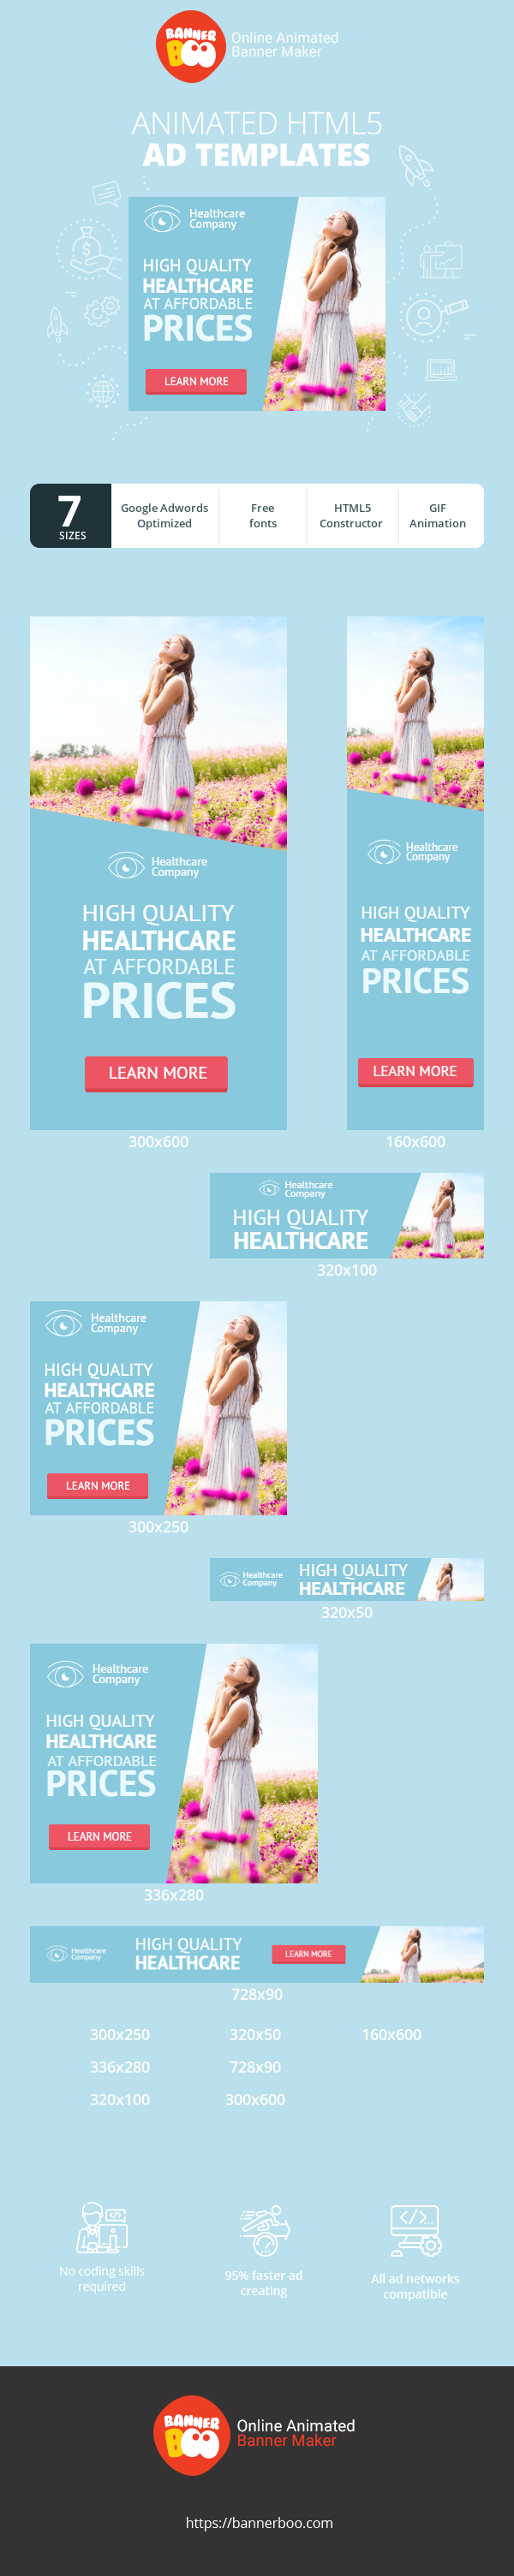 Banner ad template — High Quality Healthcare at Affordable Prices